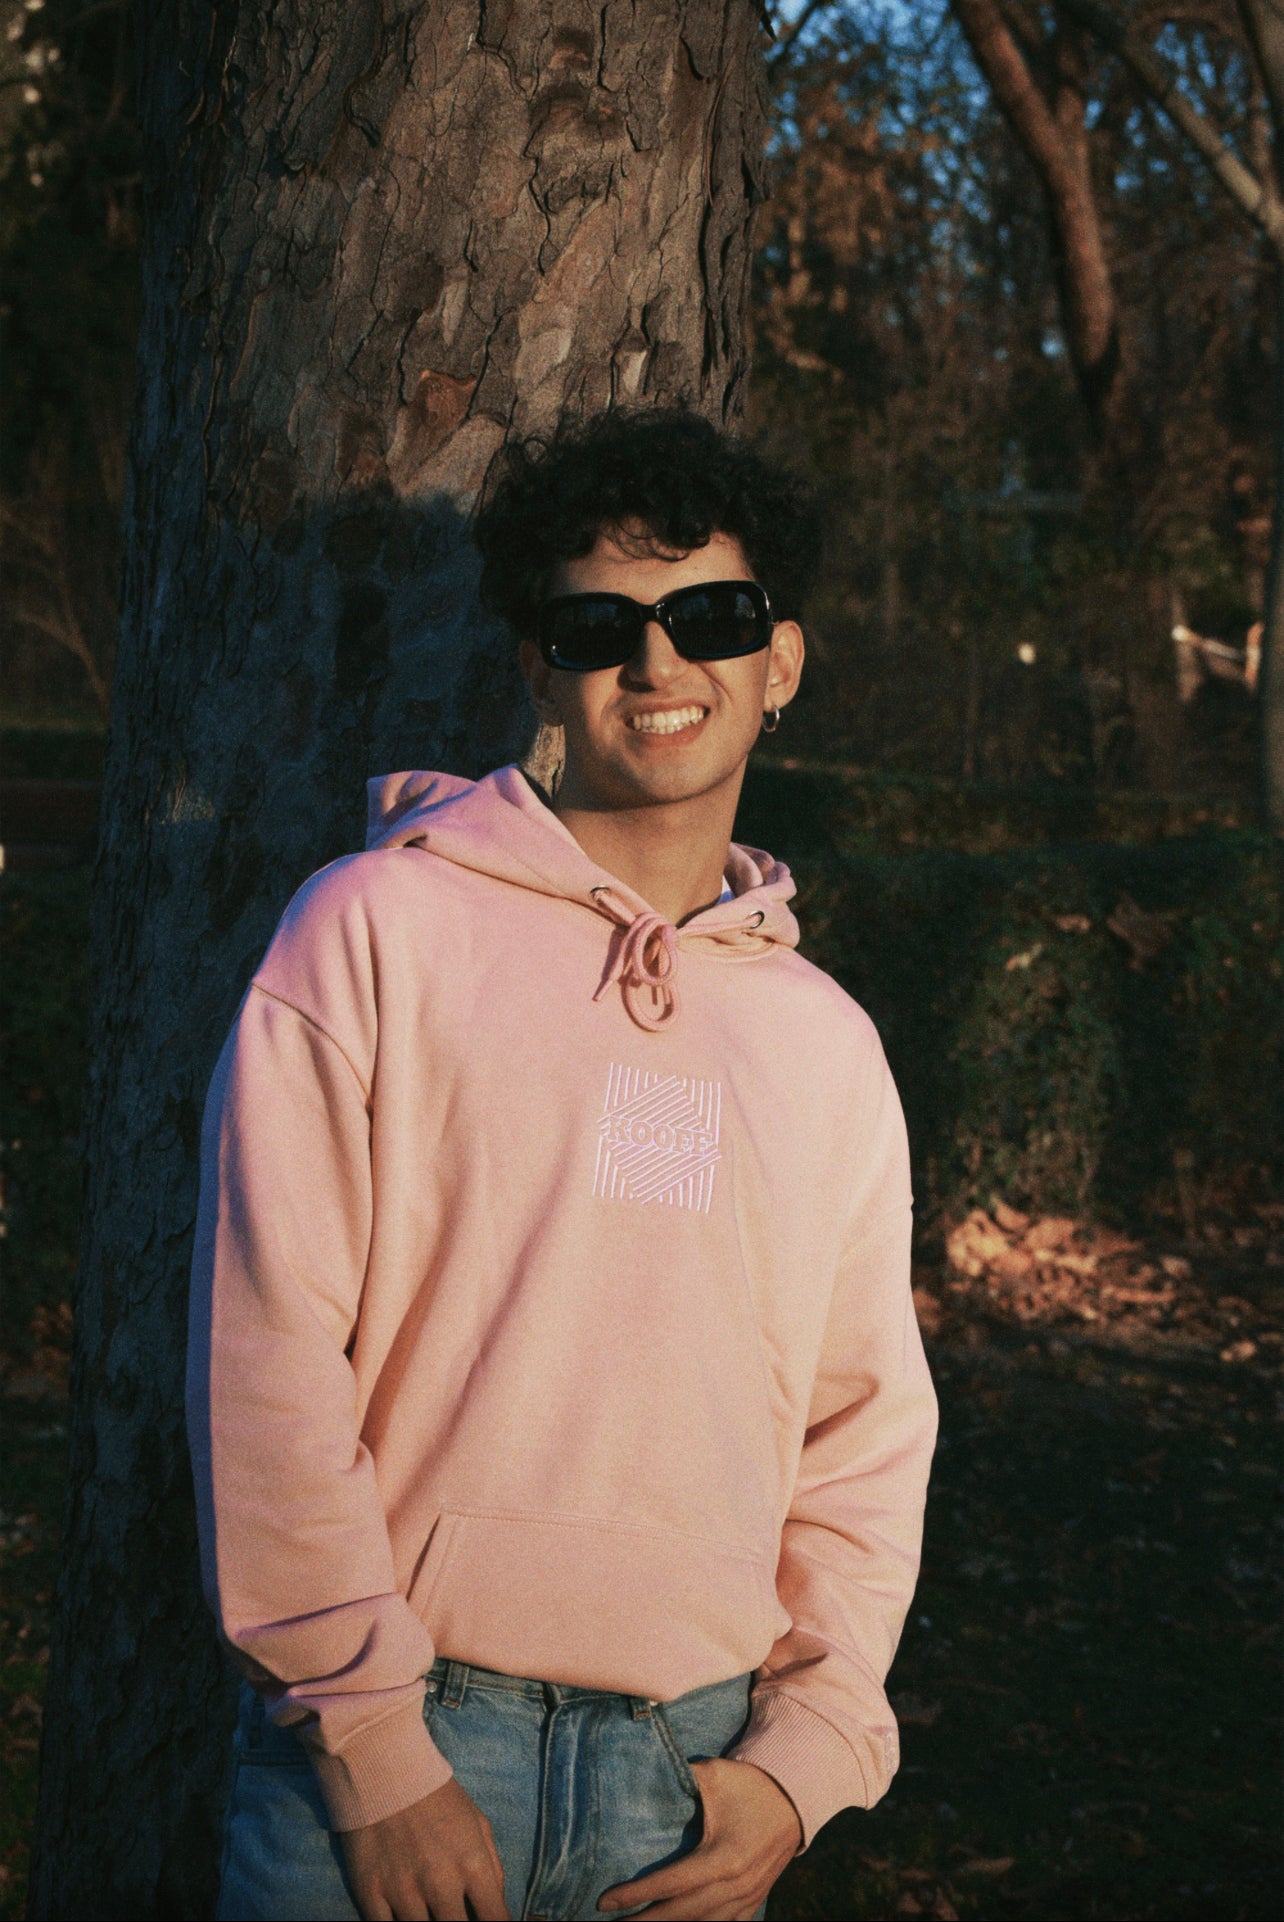 COUTURE HOODIE RE-EDITION2022 PINK